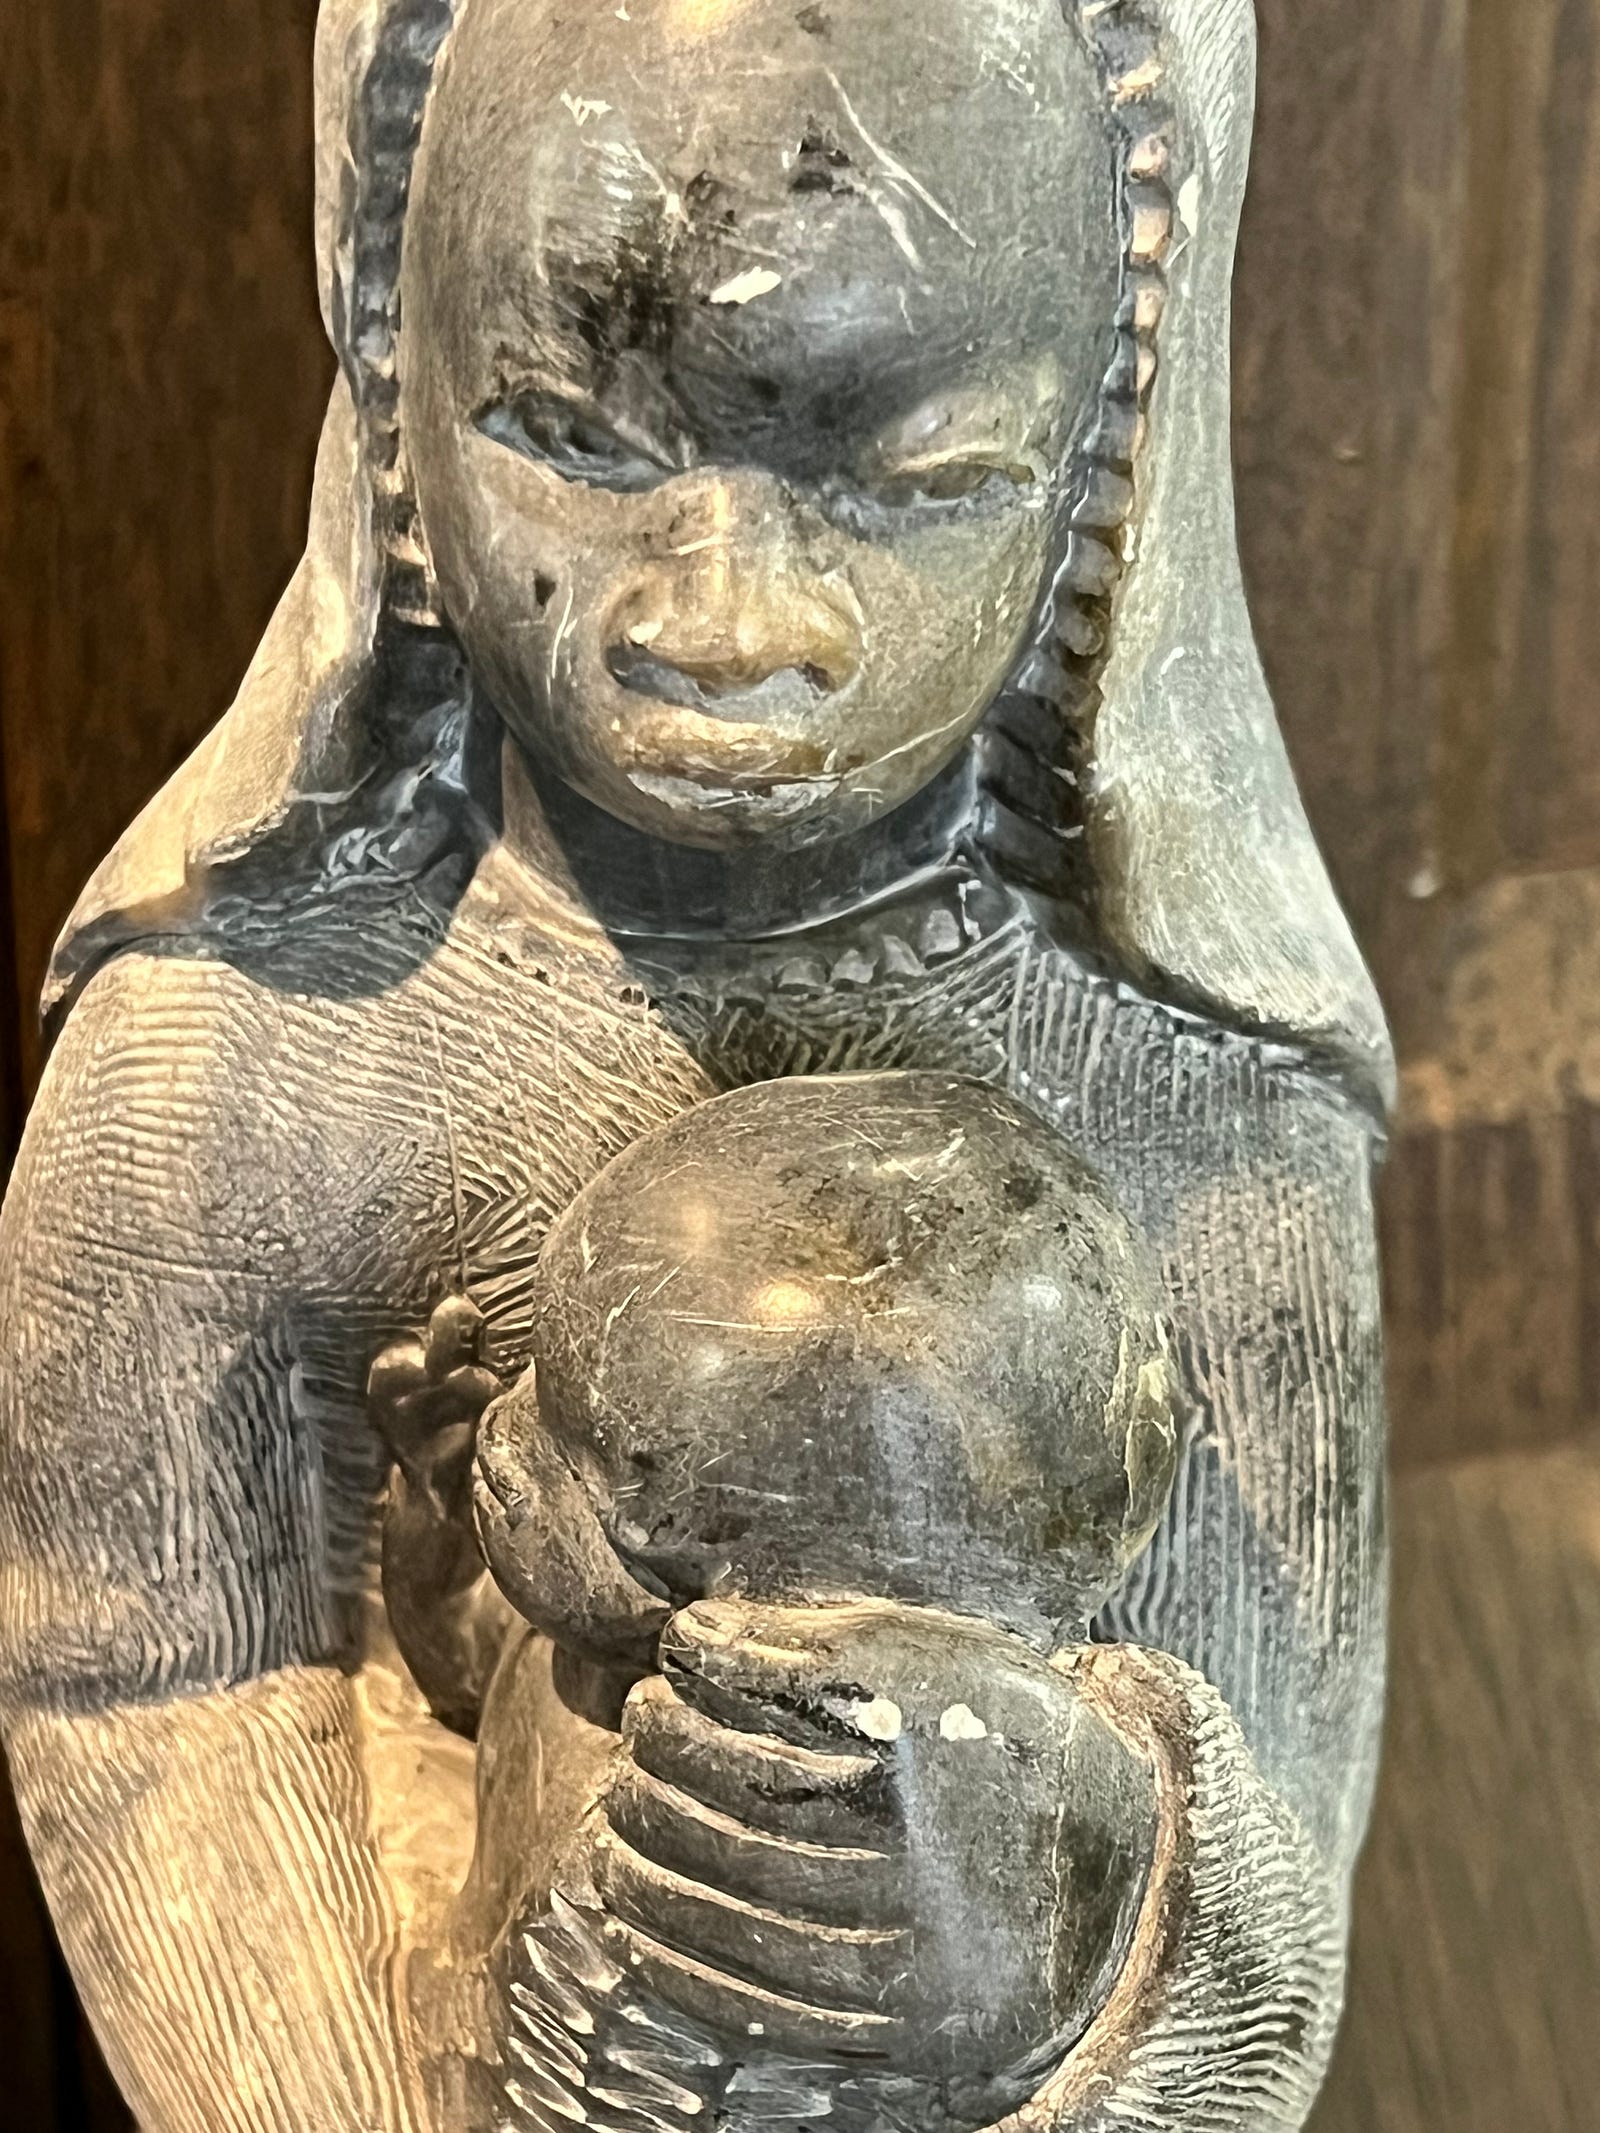 Photo of a black Madonna and child taken at Holy family Retreat Center in West Hartford, CT. The statue is made of black stone that reveals a white chalky interior were carved. The Madonna’s dress is richly texturedwith fine gomatrical lines.